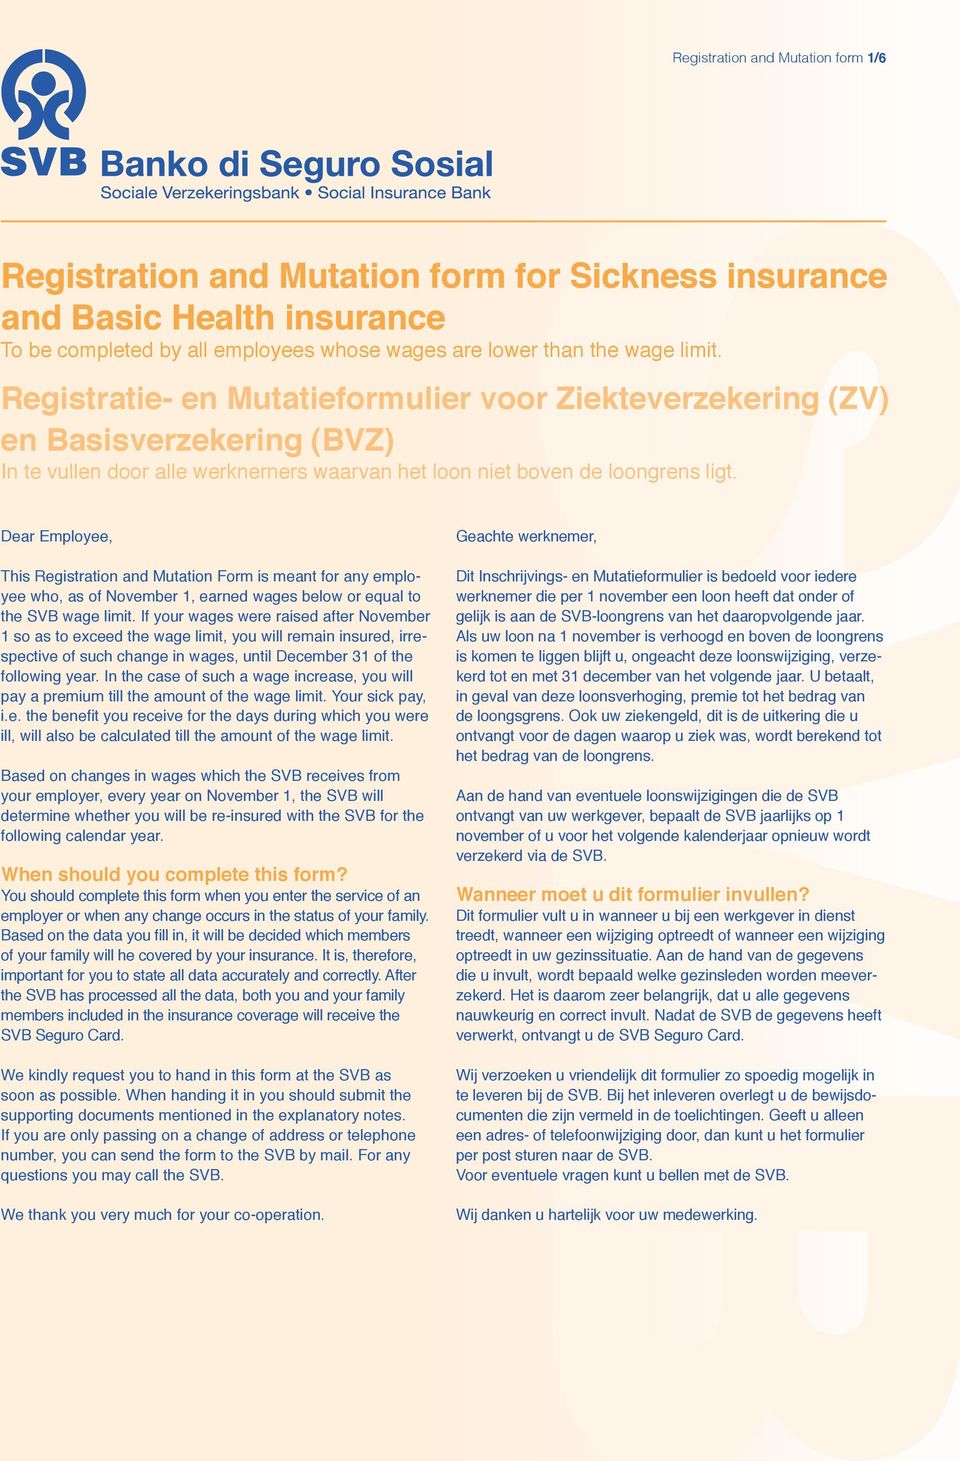 Dear Employee, This Registration and Mutation Form is meant for any employee who, as of November 1, earned wages below or equal to the SVB wage limit.